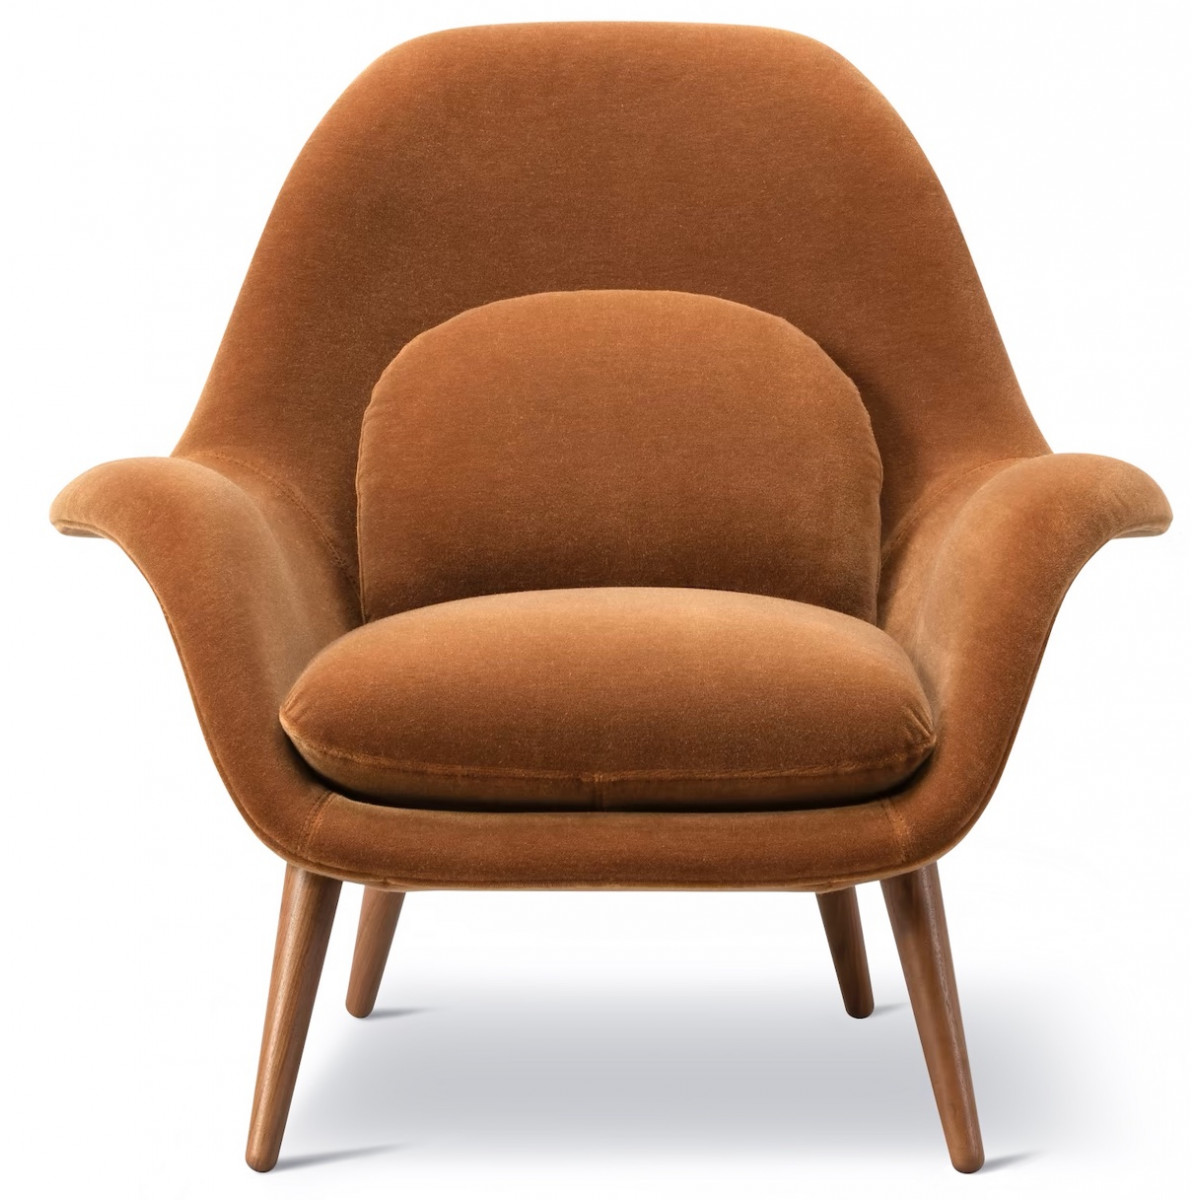 Grand Mohair 2103  + noyer vernis - fauteuil Swoon